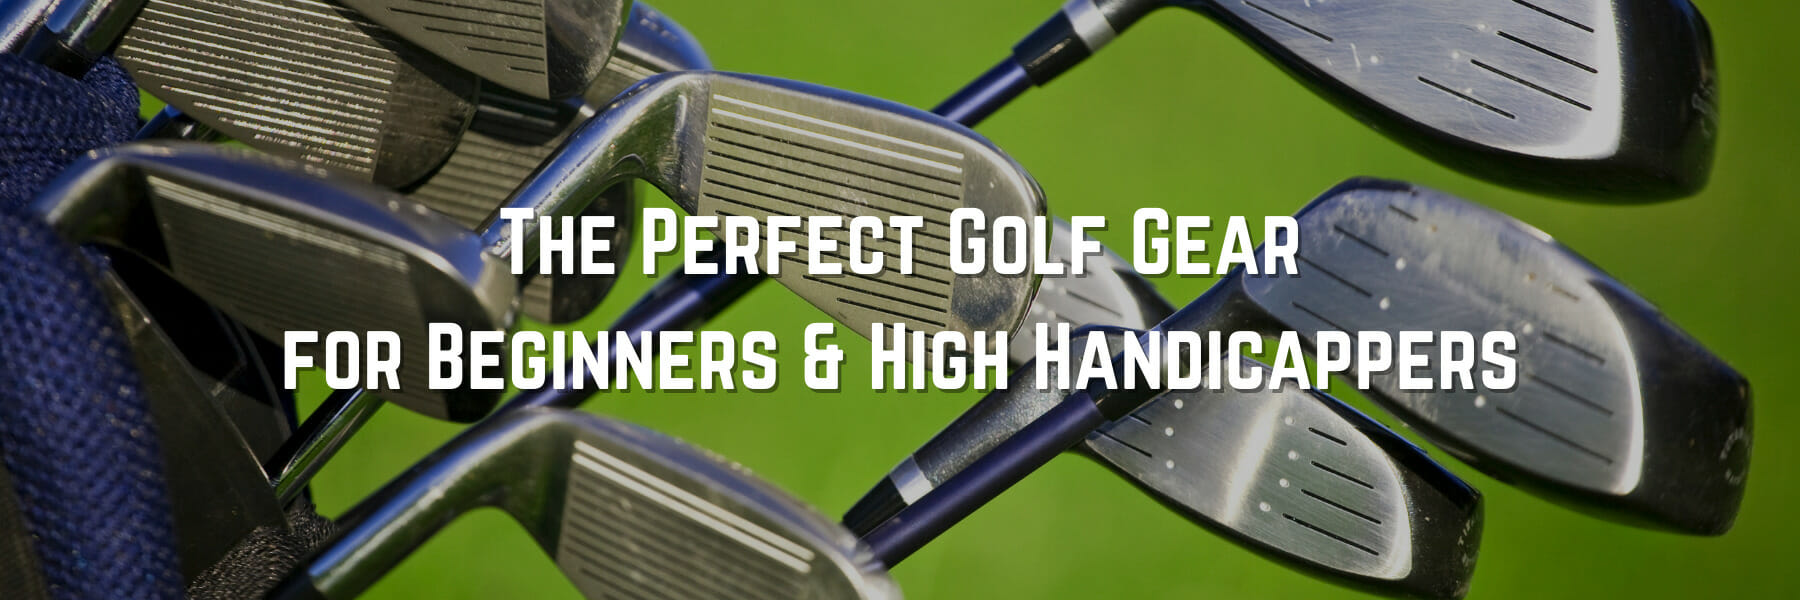 The Perfect Golf Gear for Beginners & High Handicappers